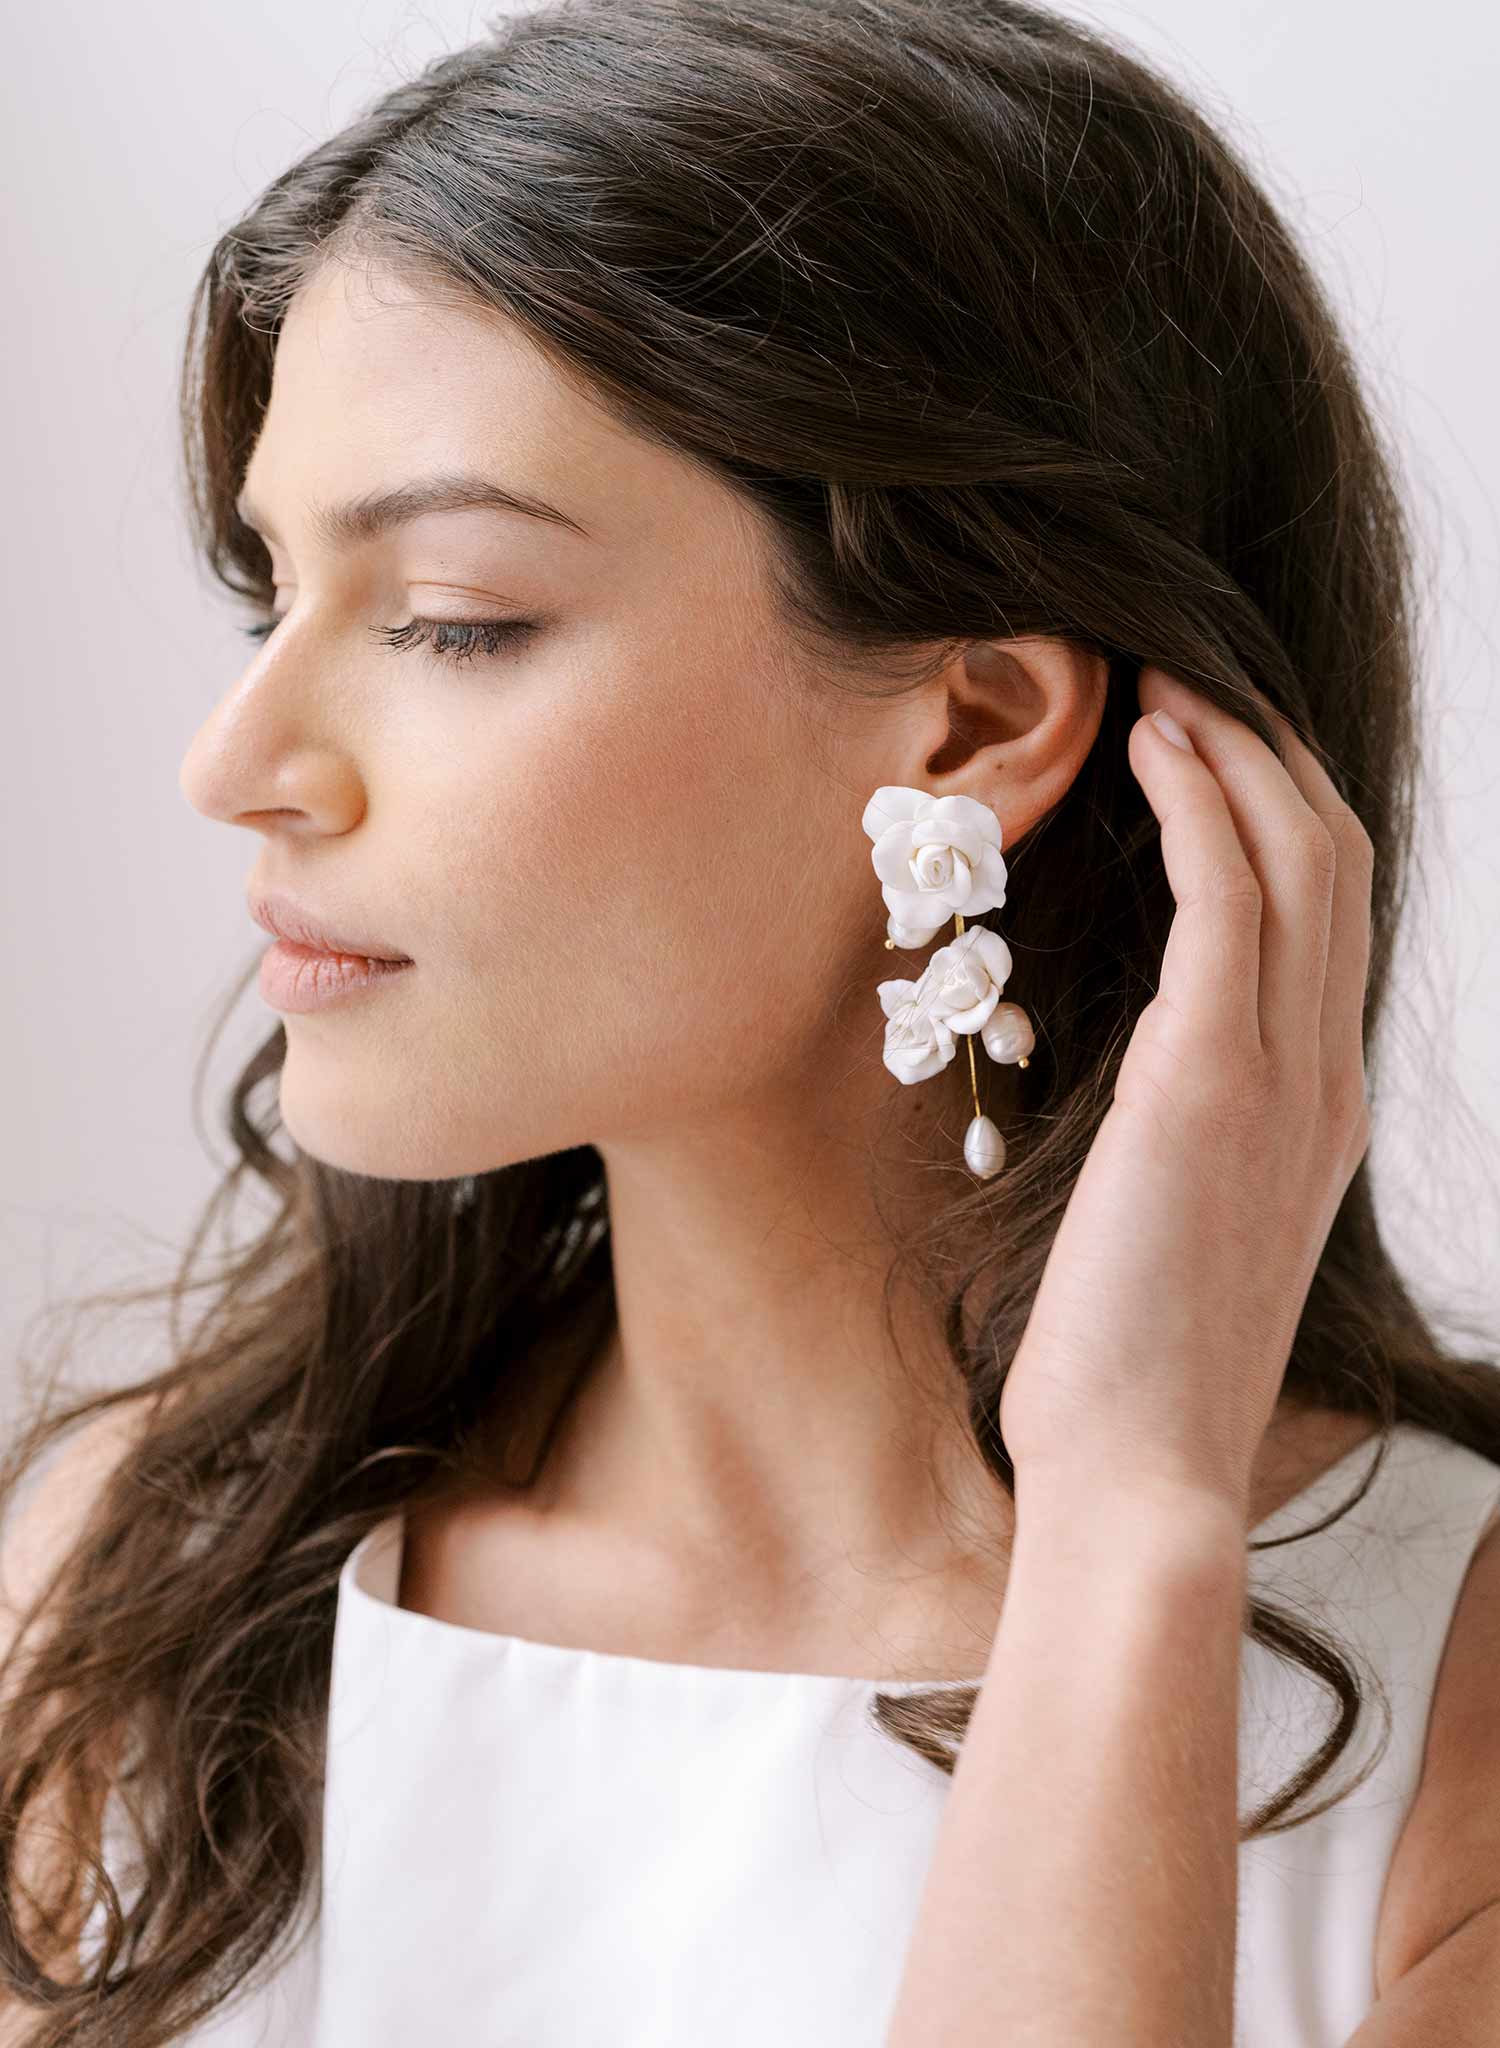 Rose blooms and pearls earrings - Style #2318